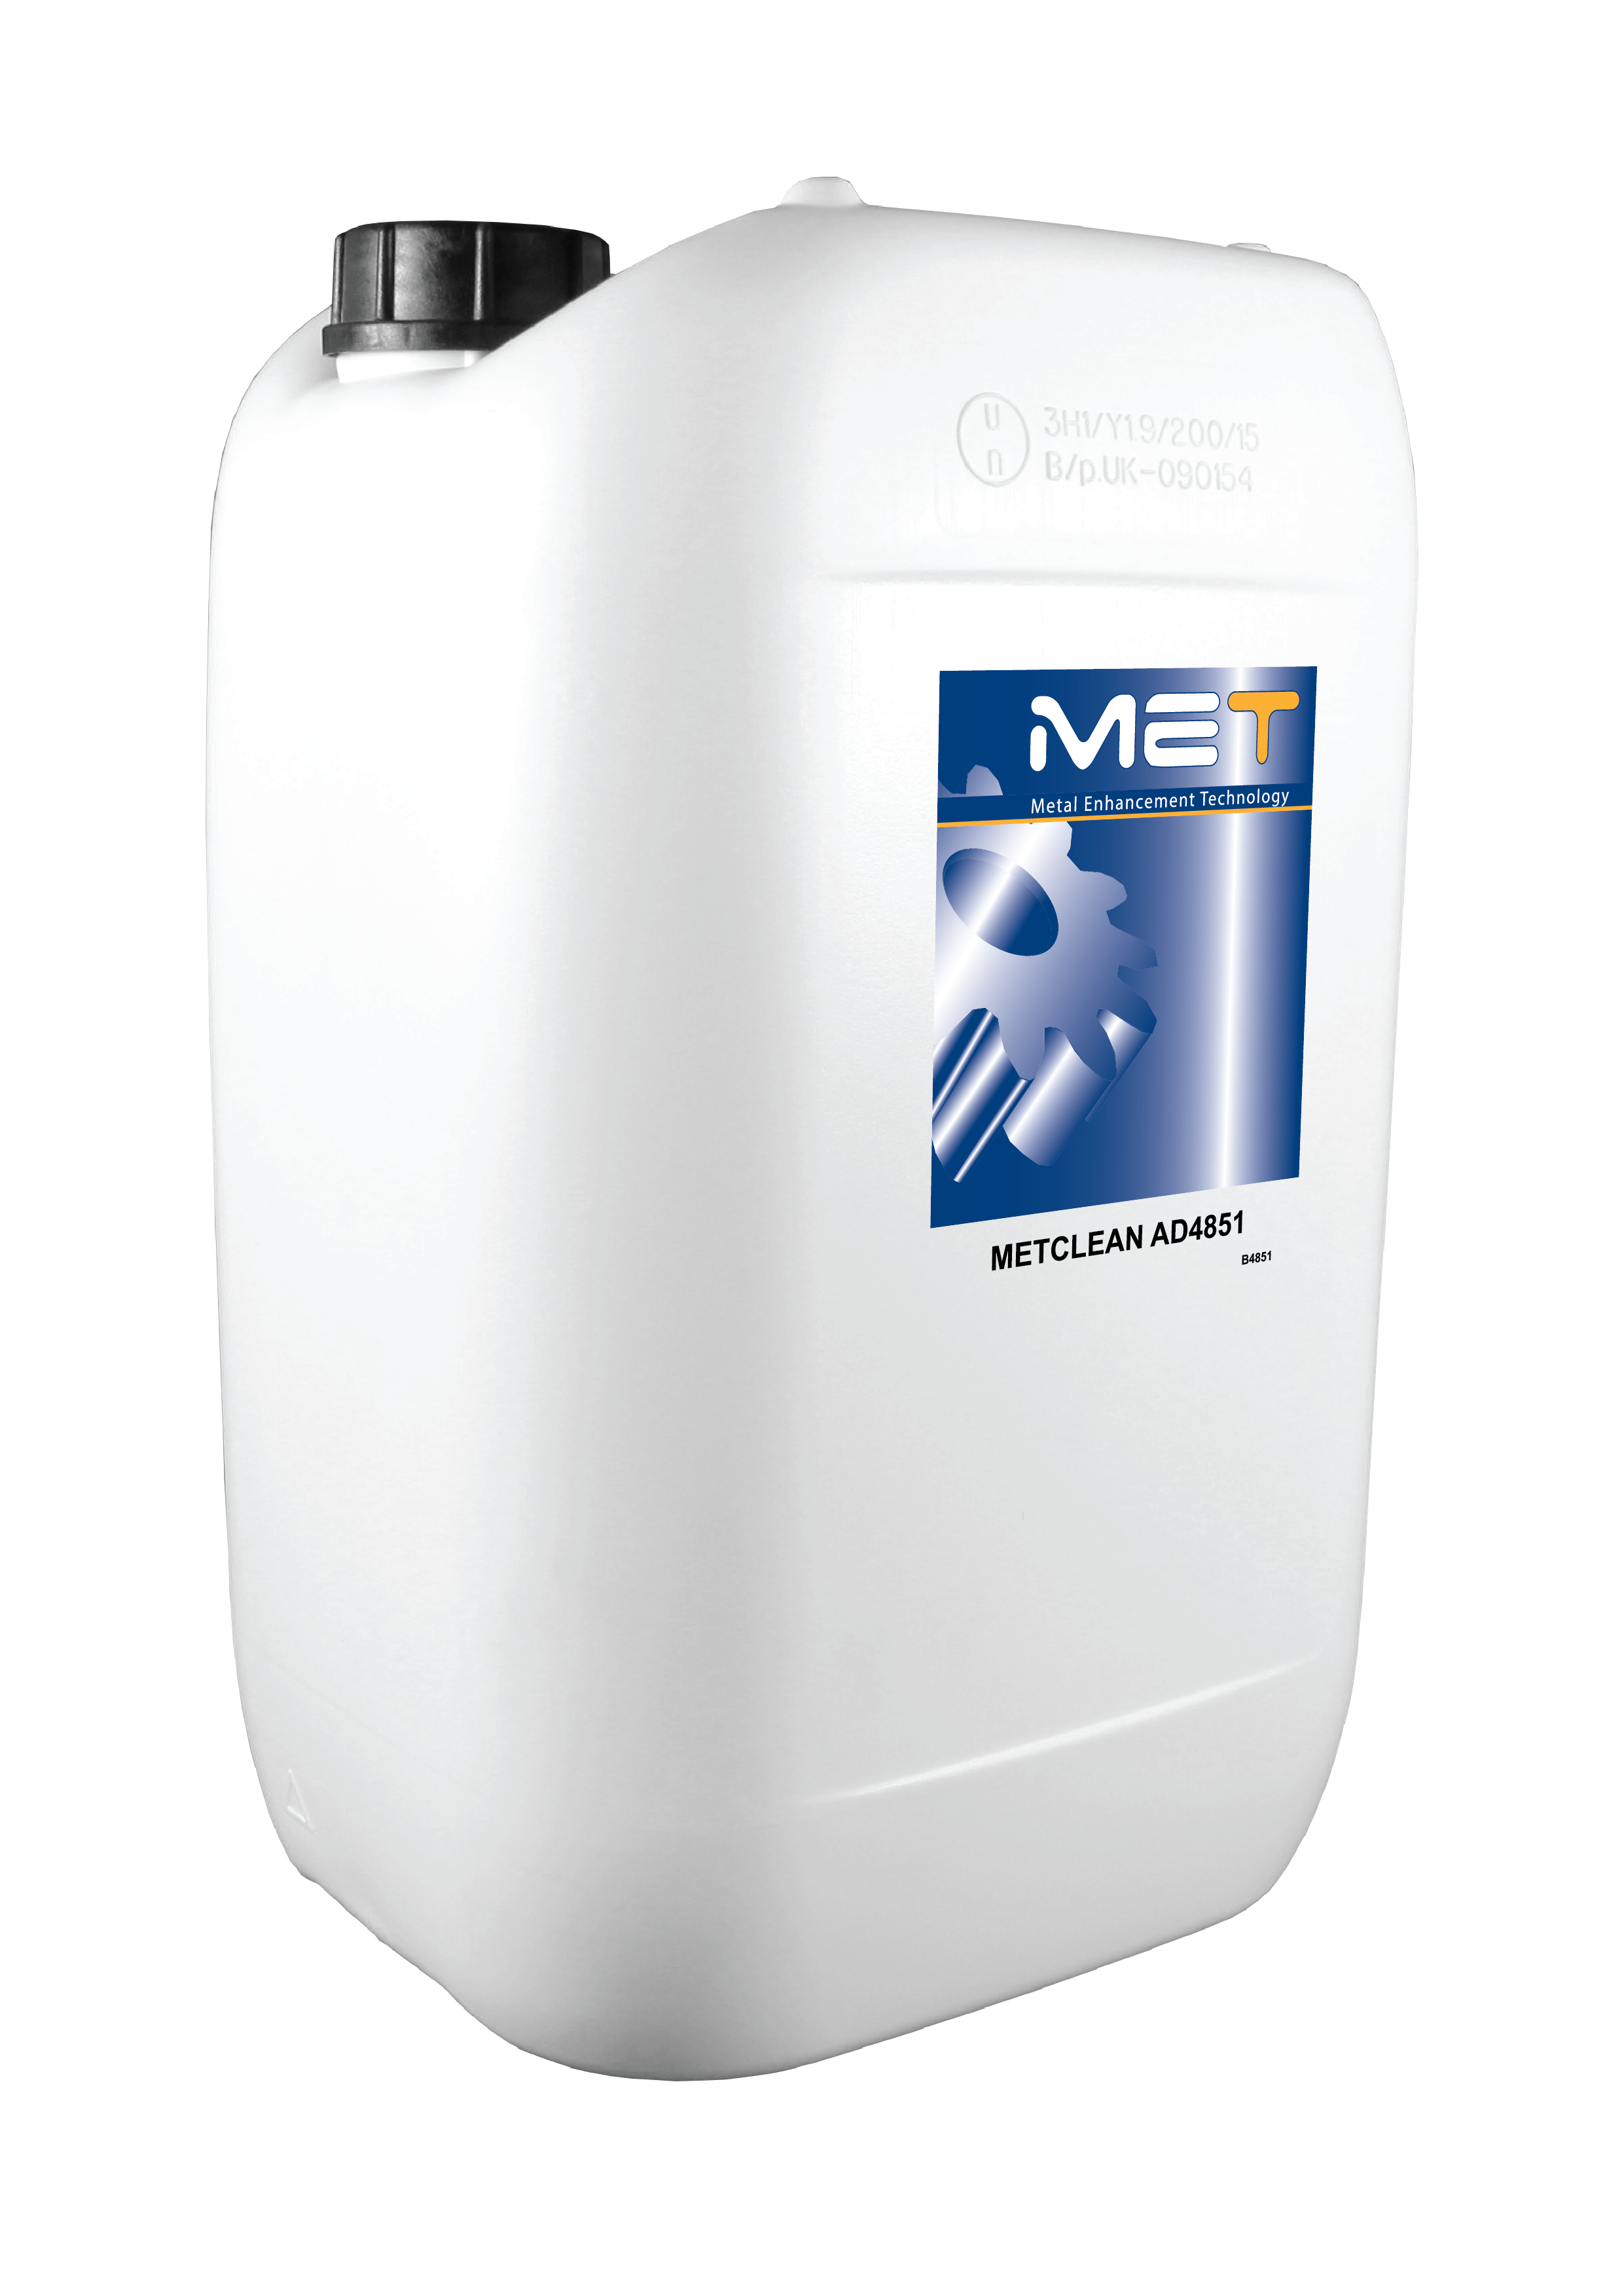 Metclean AD4851